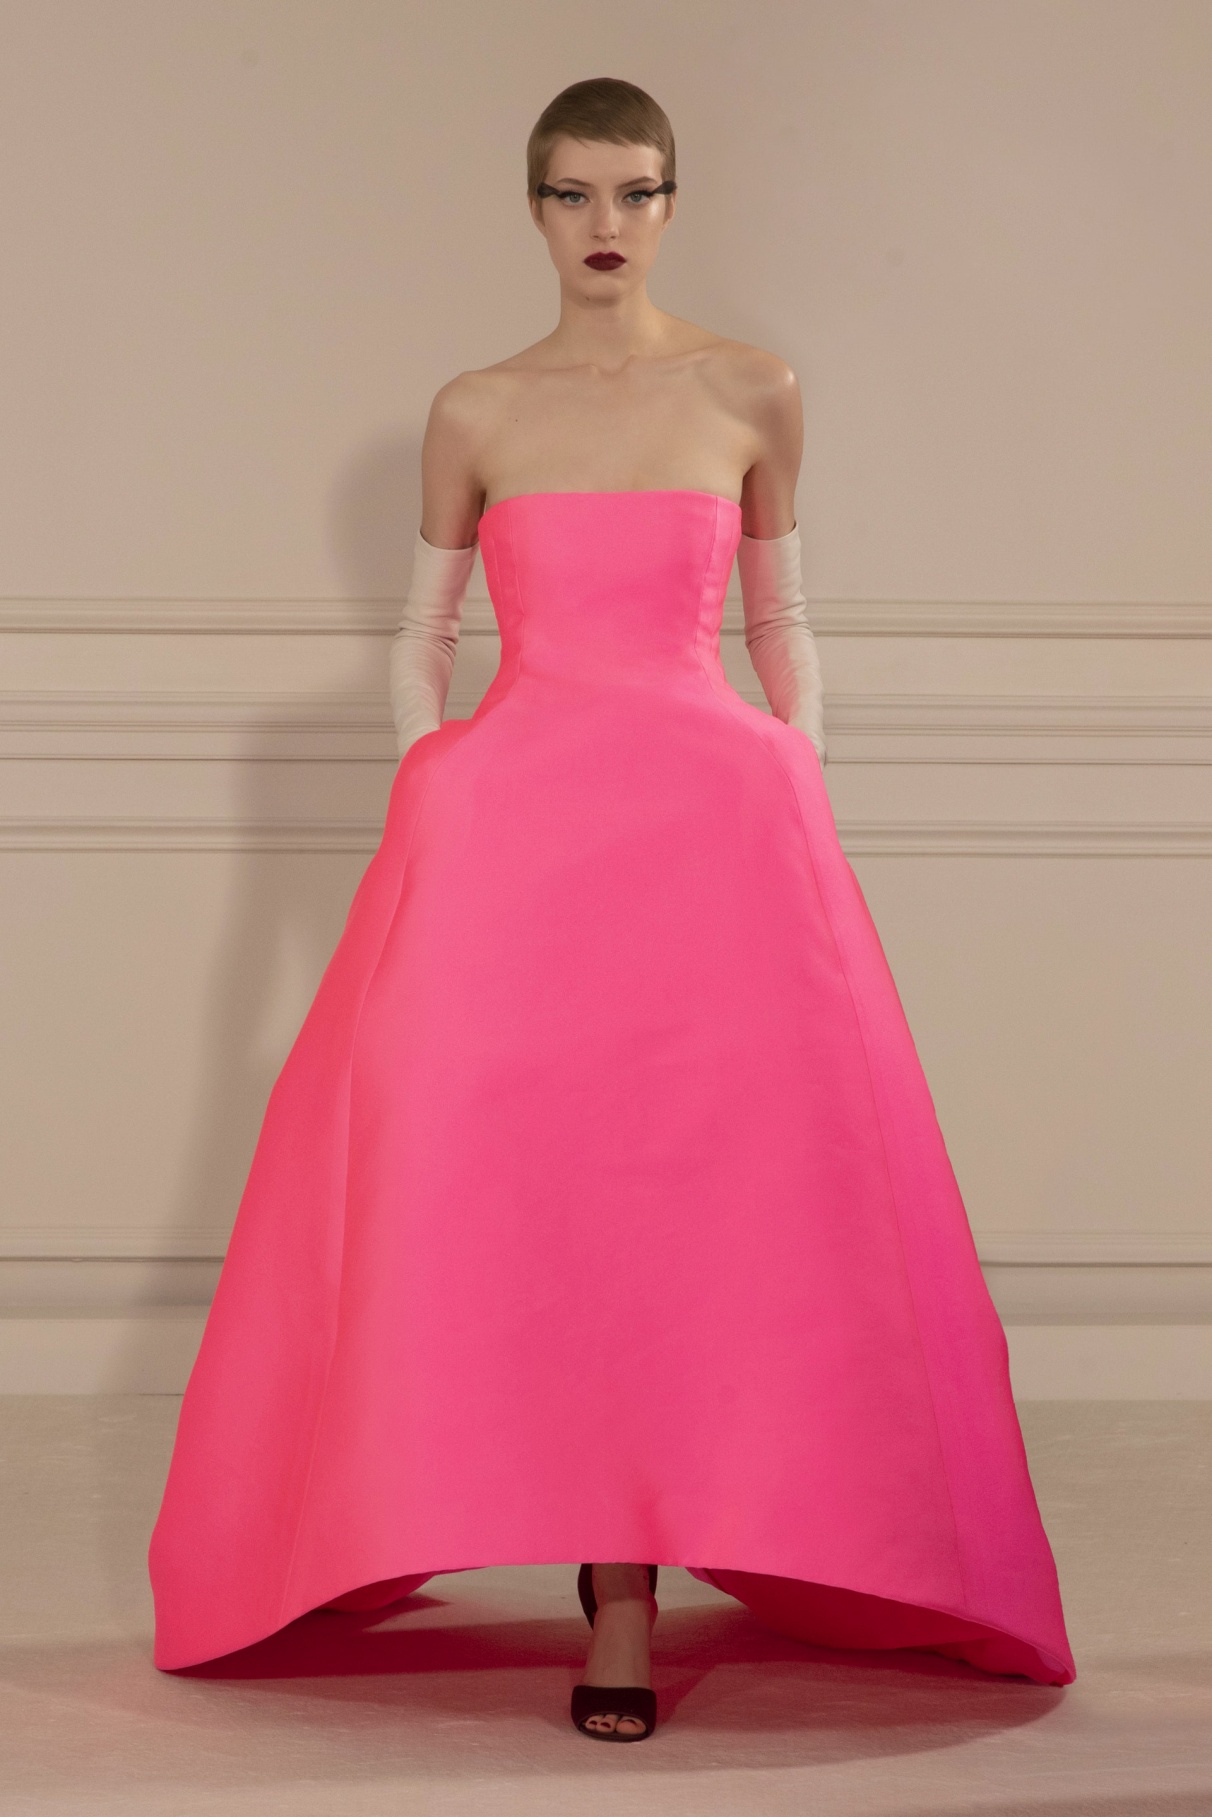 Couture 1-22 val pink.jpg